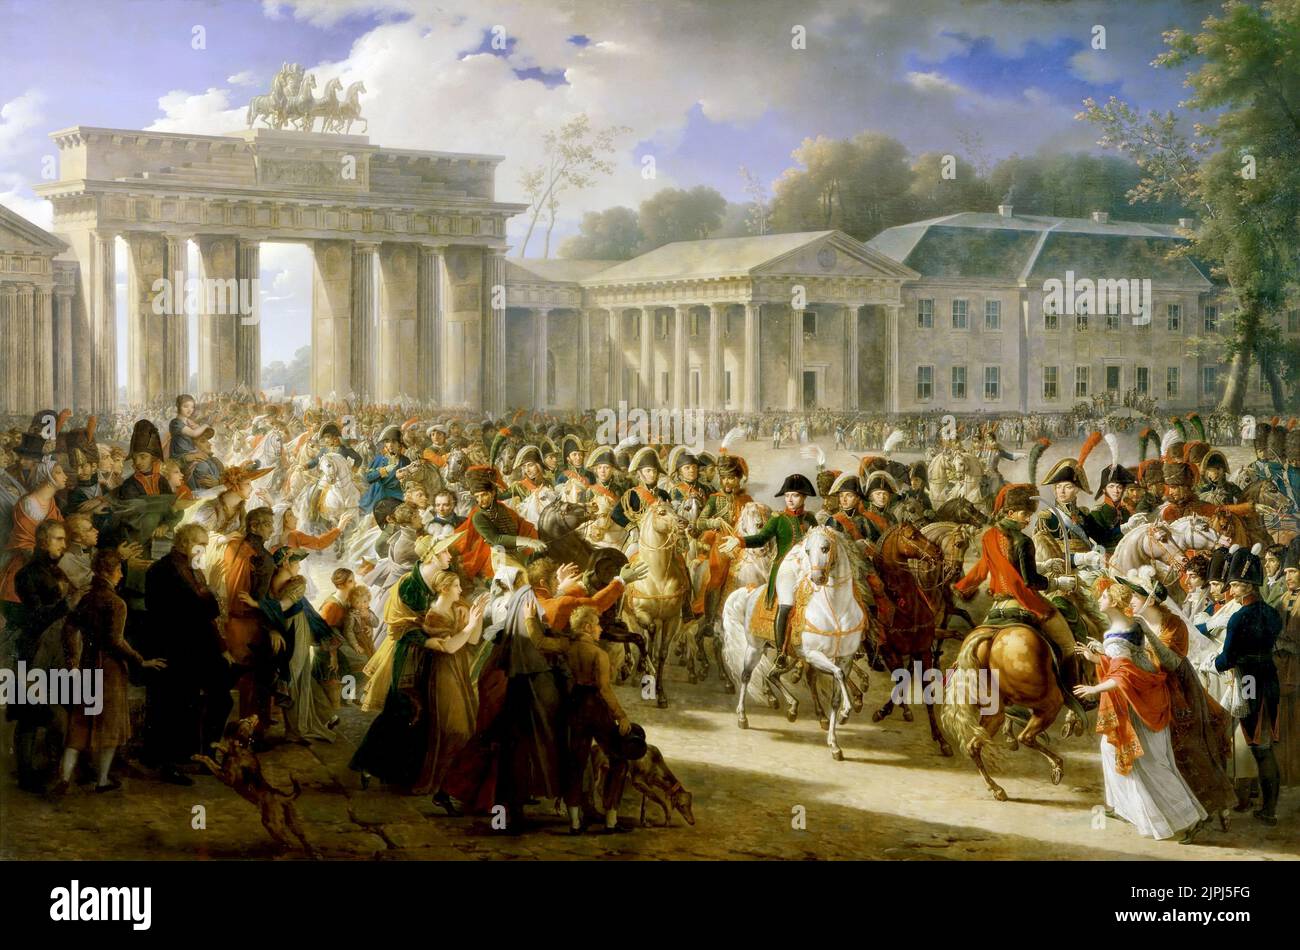 After defeating Prussian forces at Jena, the French Army entered Berlin on 27 October 1806. Charles Meynier  Napoleon passing through the Brandenburg Gate after the Battle of Jena-Auerstedt (1806). Painted by Charles Meynier in 1810. Stock Photo